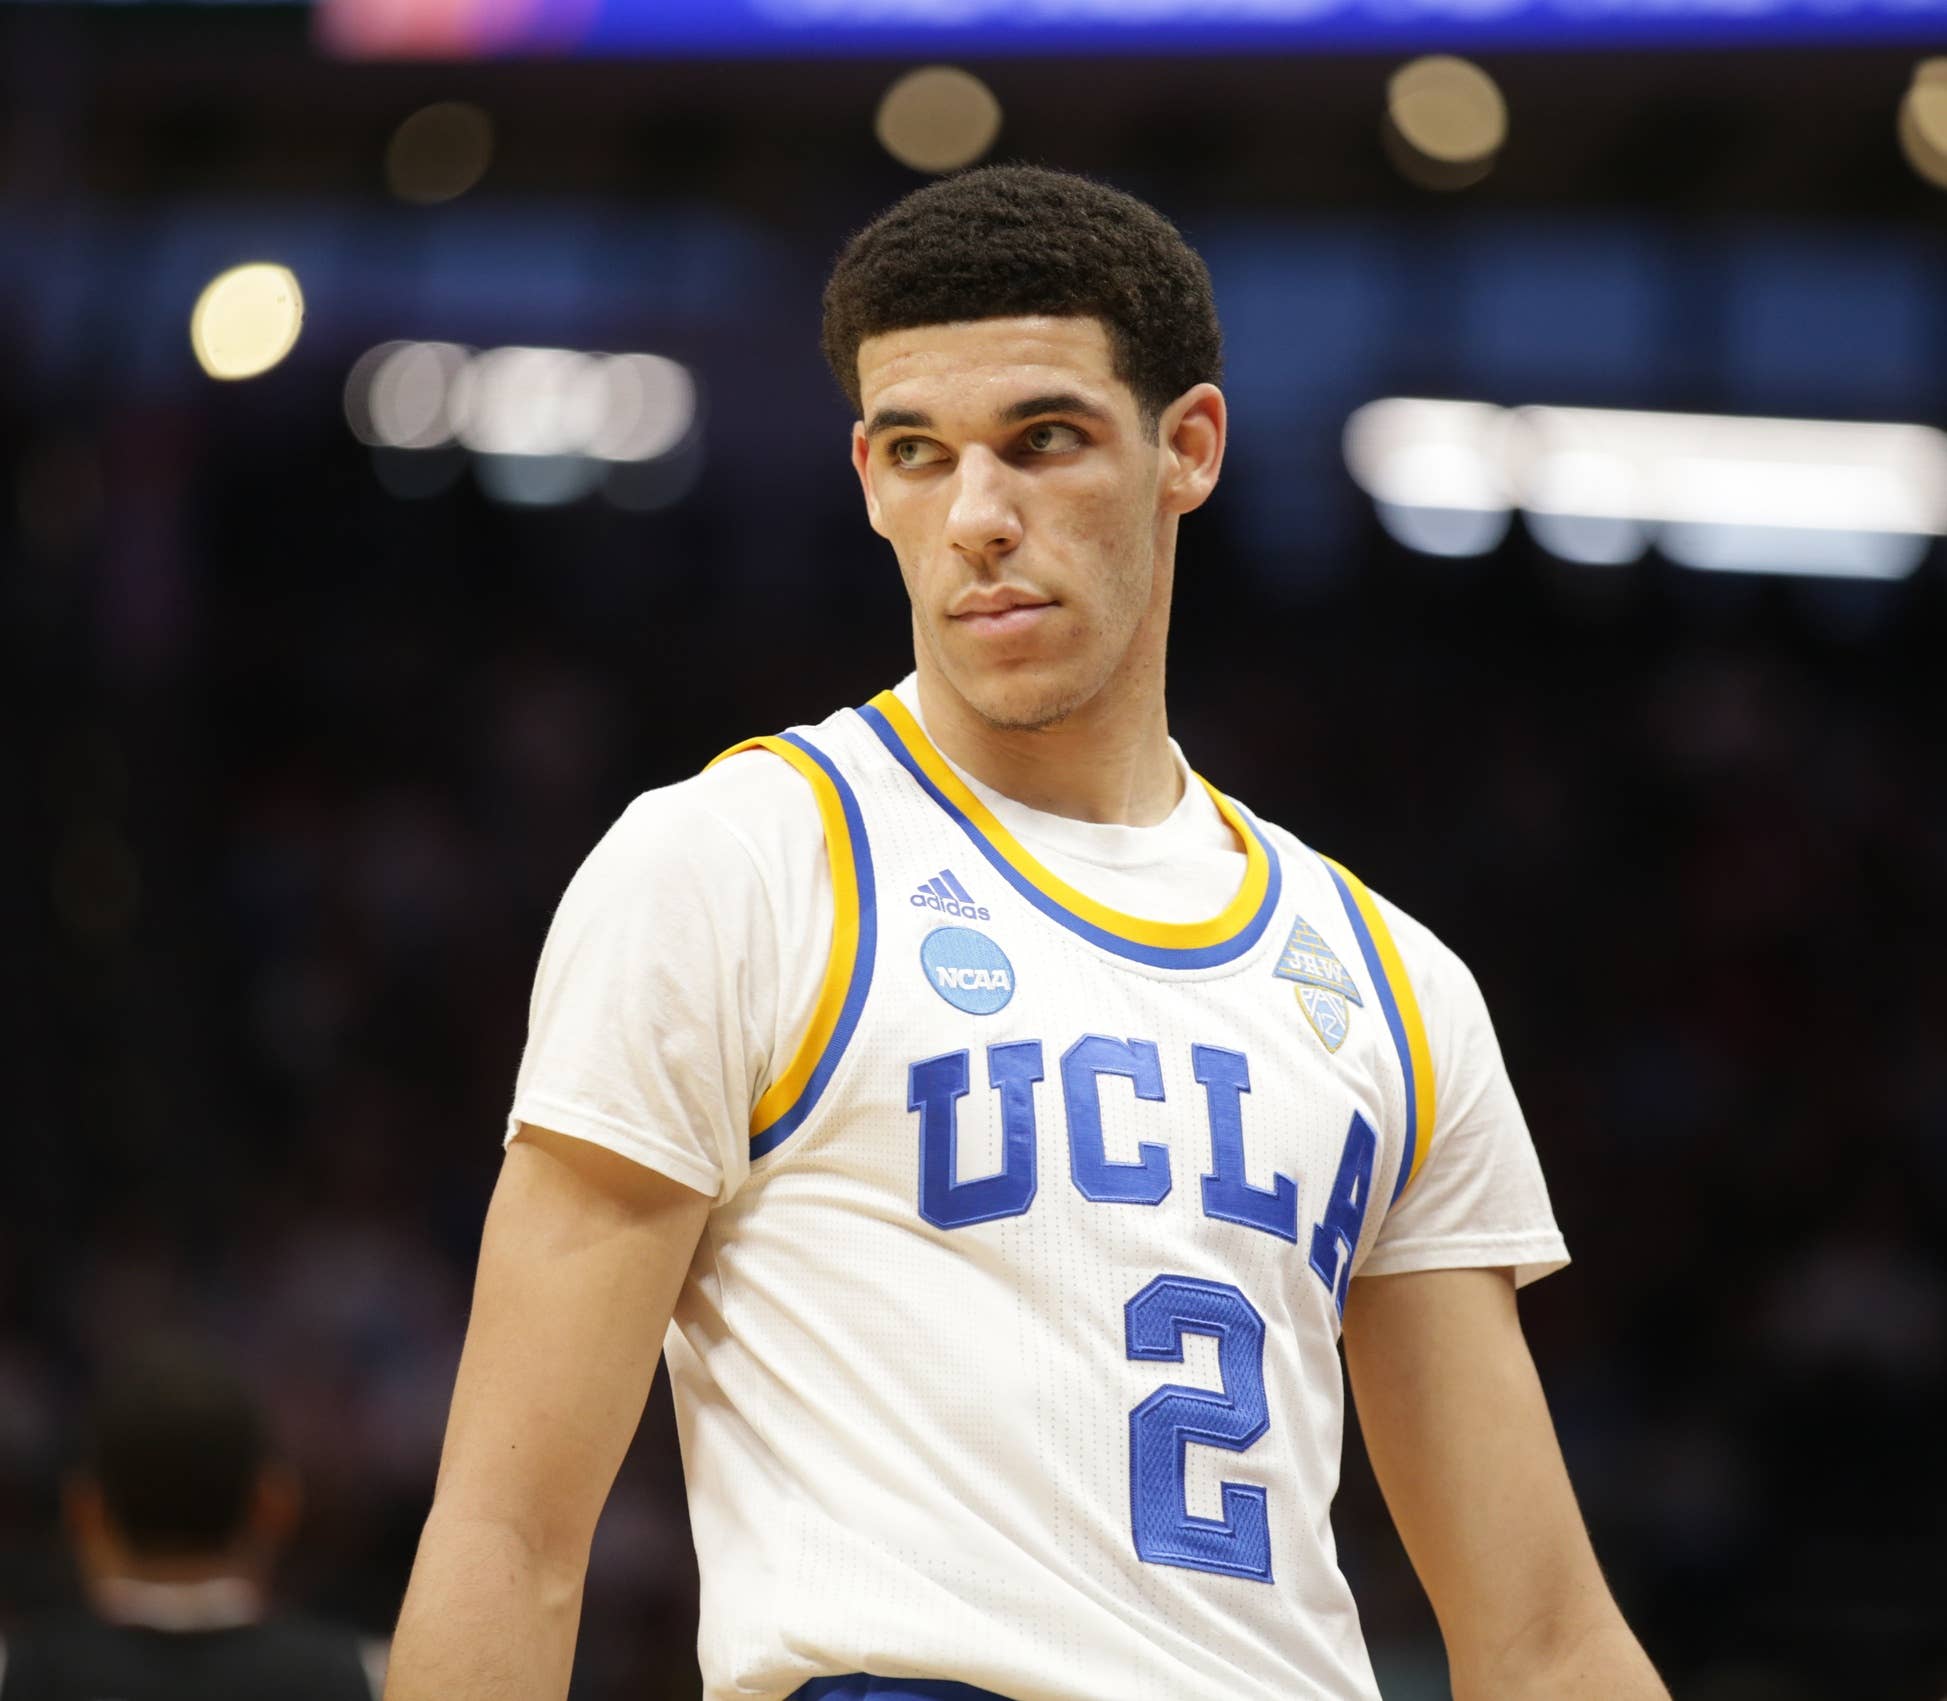 Why The Big Sneaker Turning Down Lonzo Ball Surprising Complex